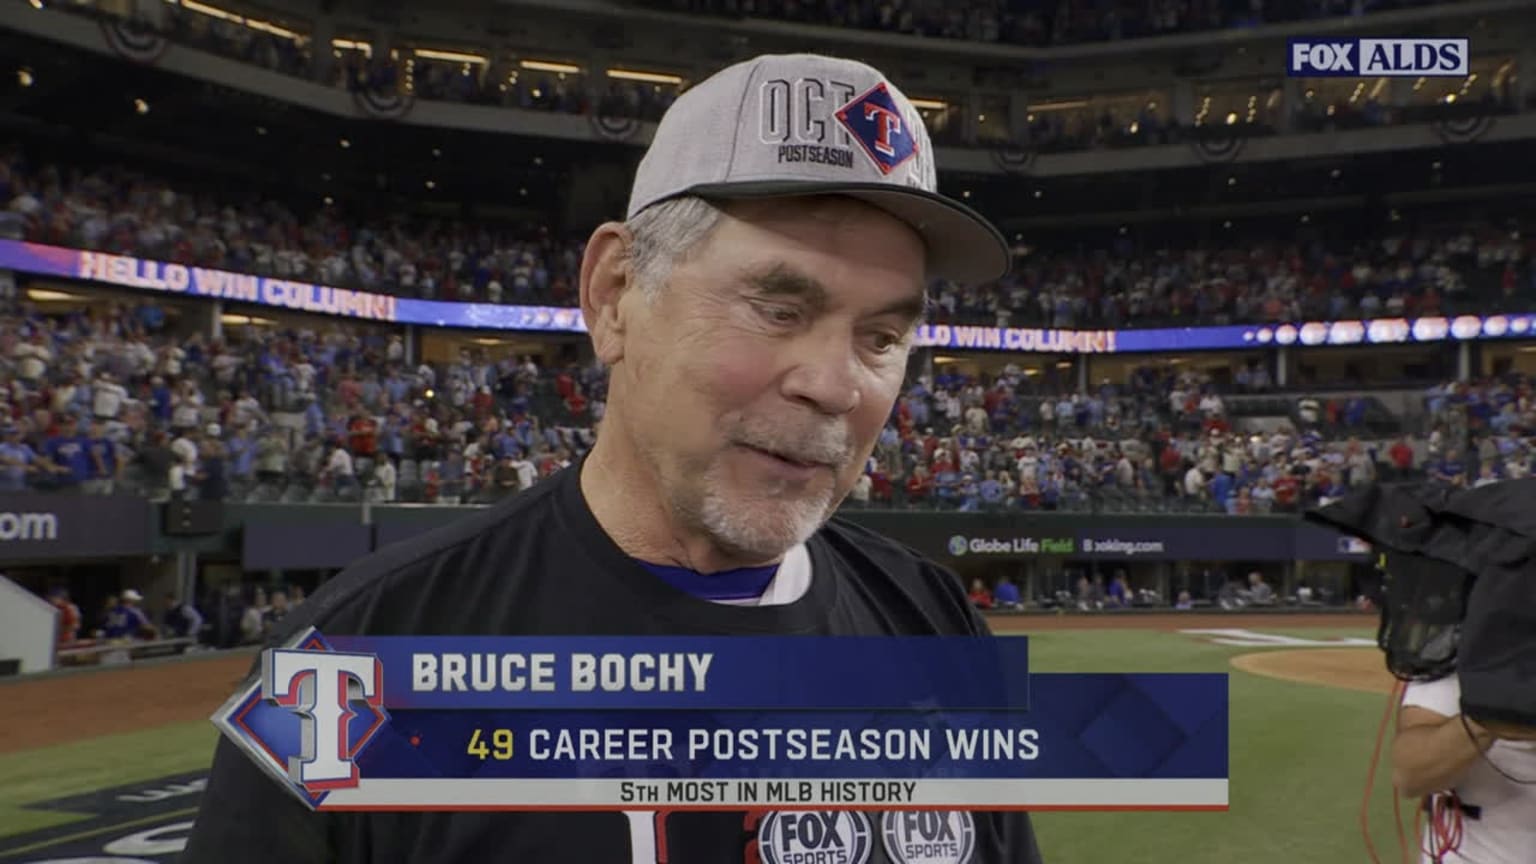 Baseball Cards Come to Life!: Player Profile: Bruce Bochy